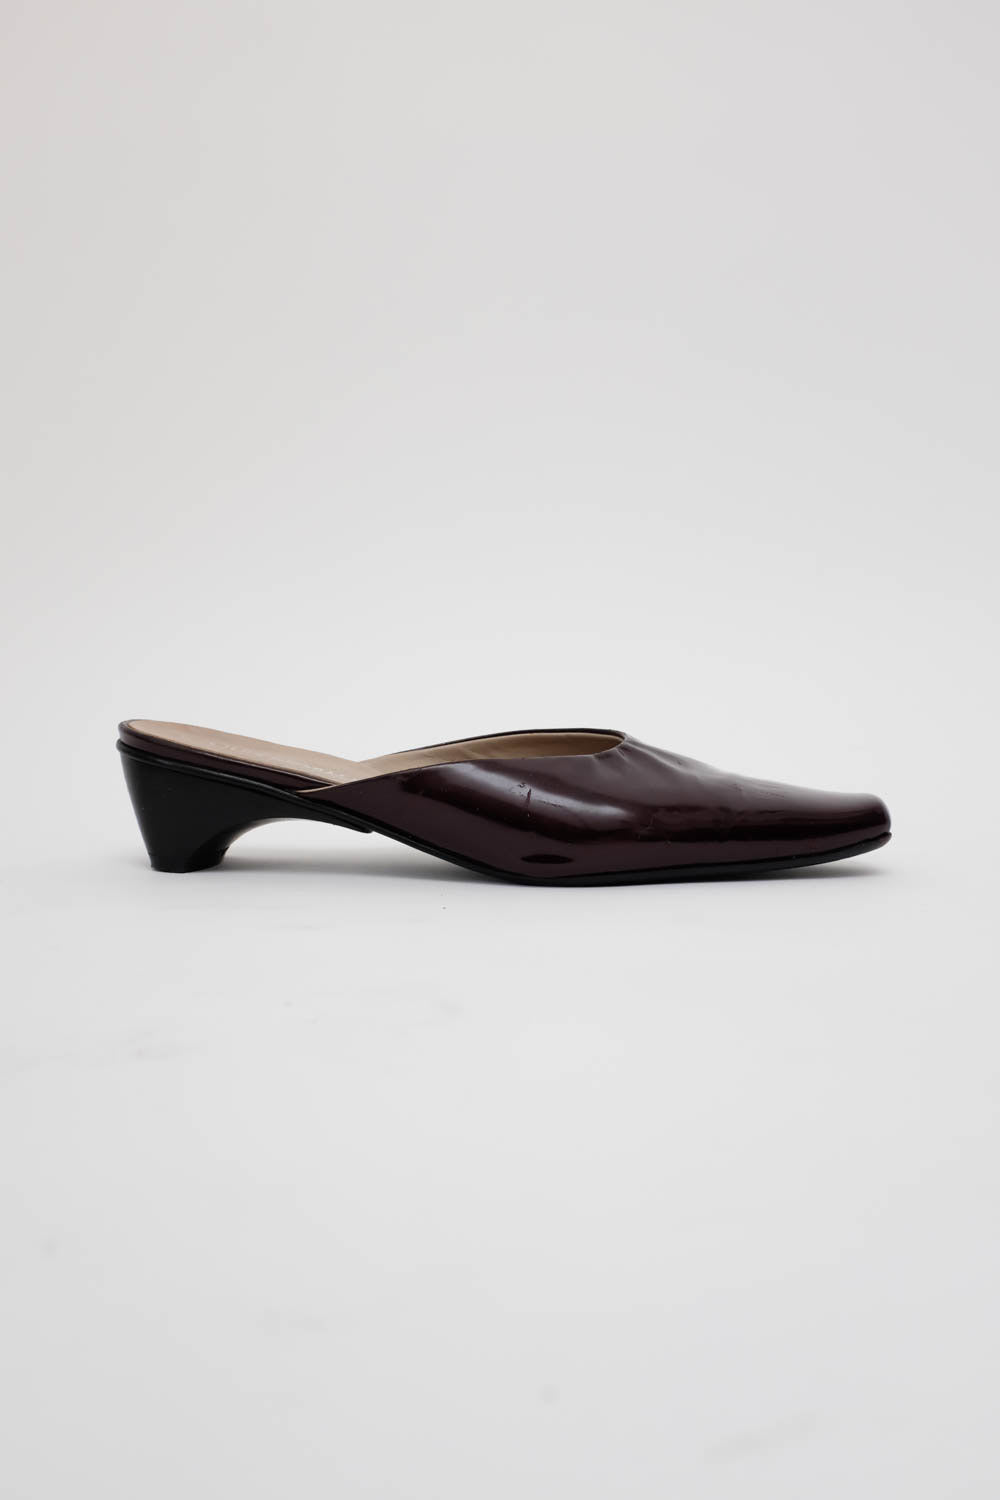 0032_PATENT LEATHER MULES 37